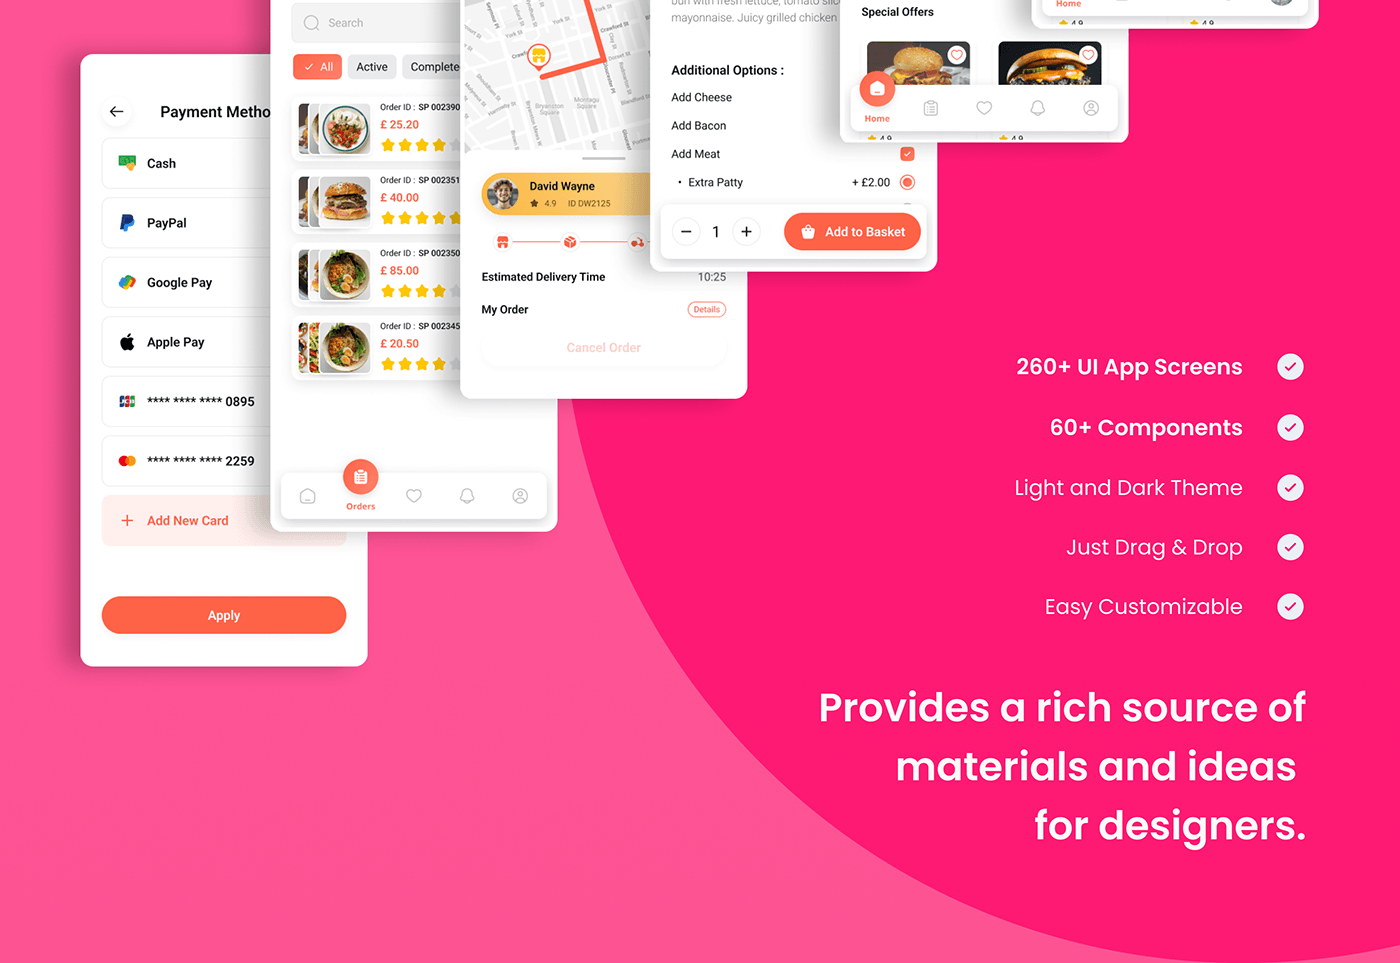 Mobile app design for efficient food delivery services
Elegant and intuitive UI for a food delivery 